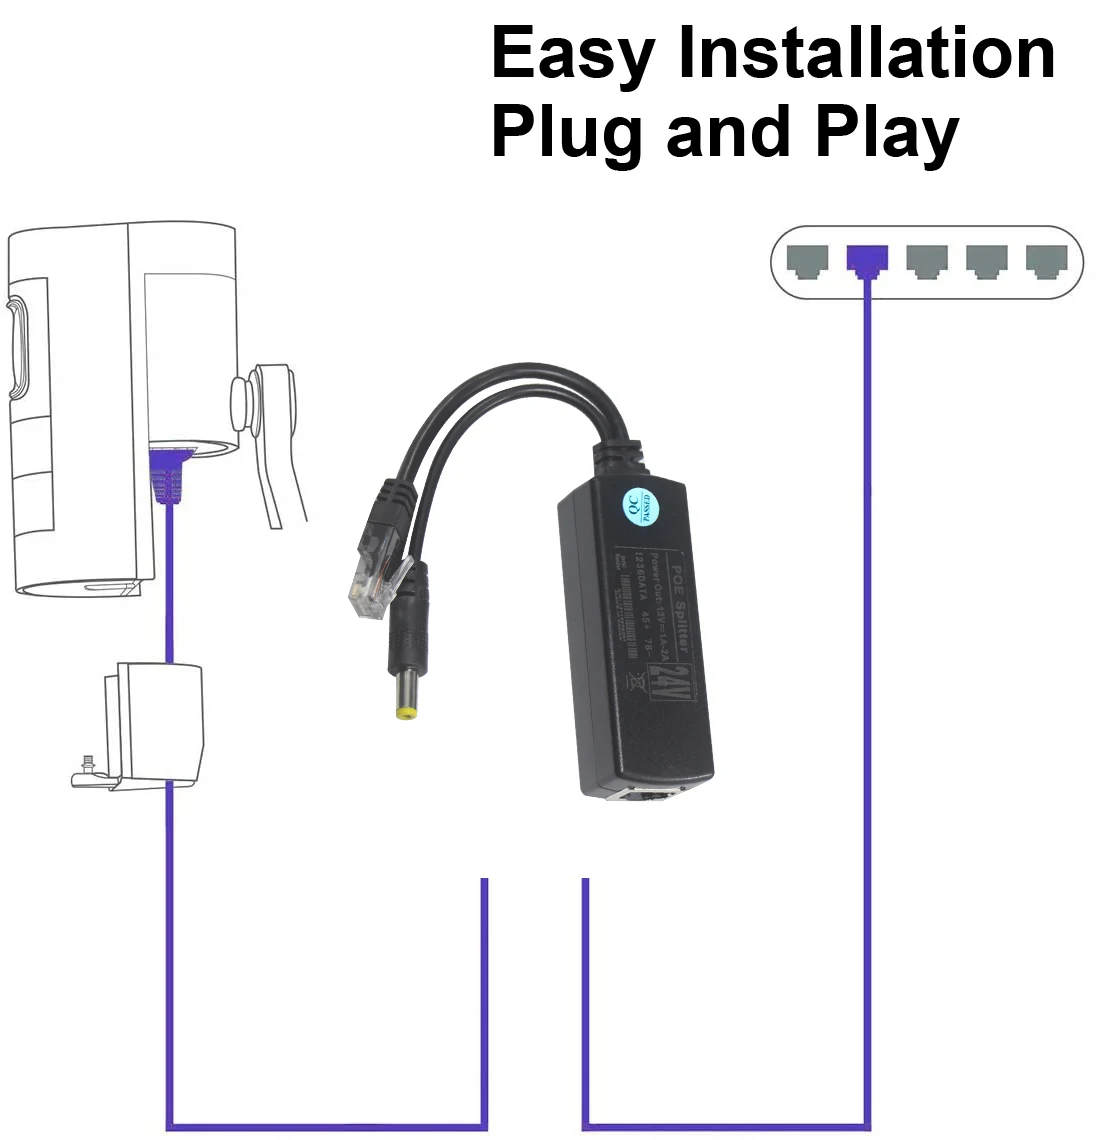 Poe Power Adapter Support for Router Security Camera 9